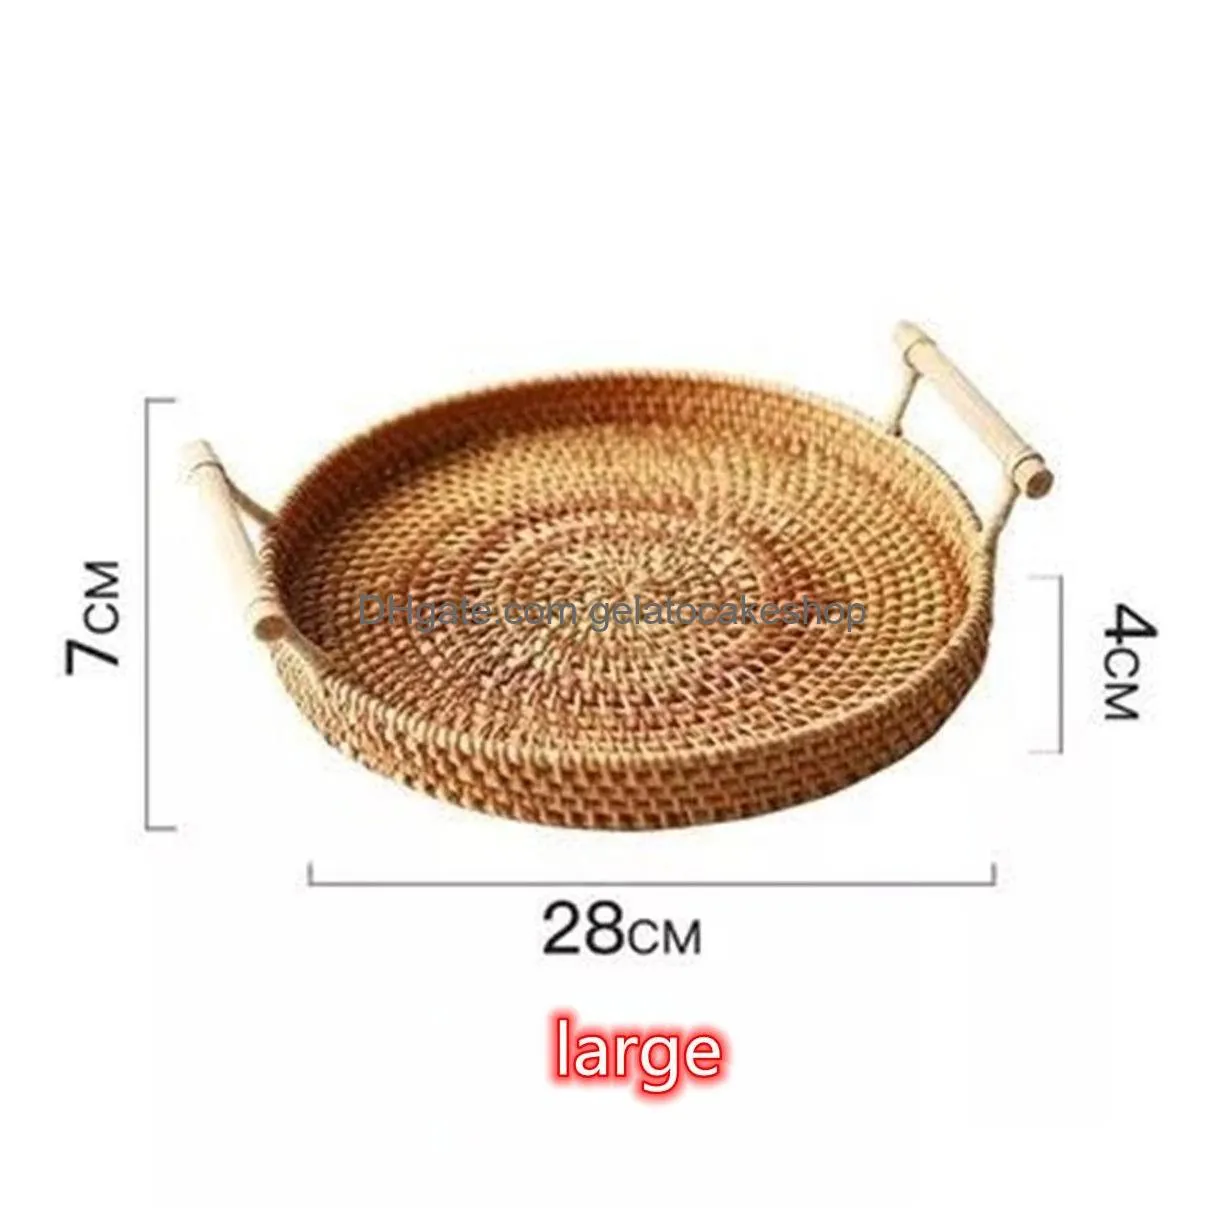 durable wicker serving tray round smooth edge multi-purpose enjoy refreshments wicker serving tray